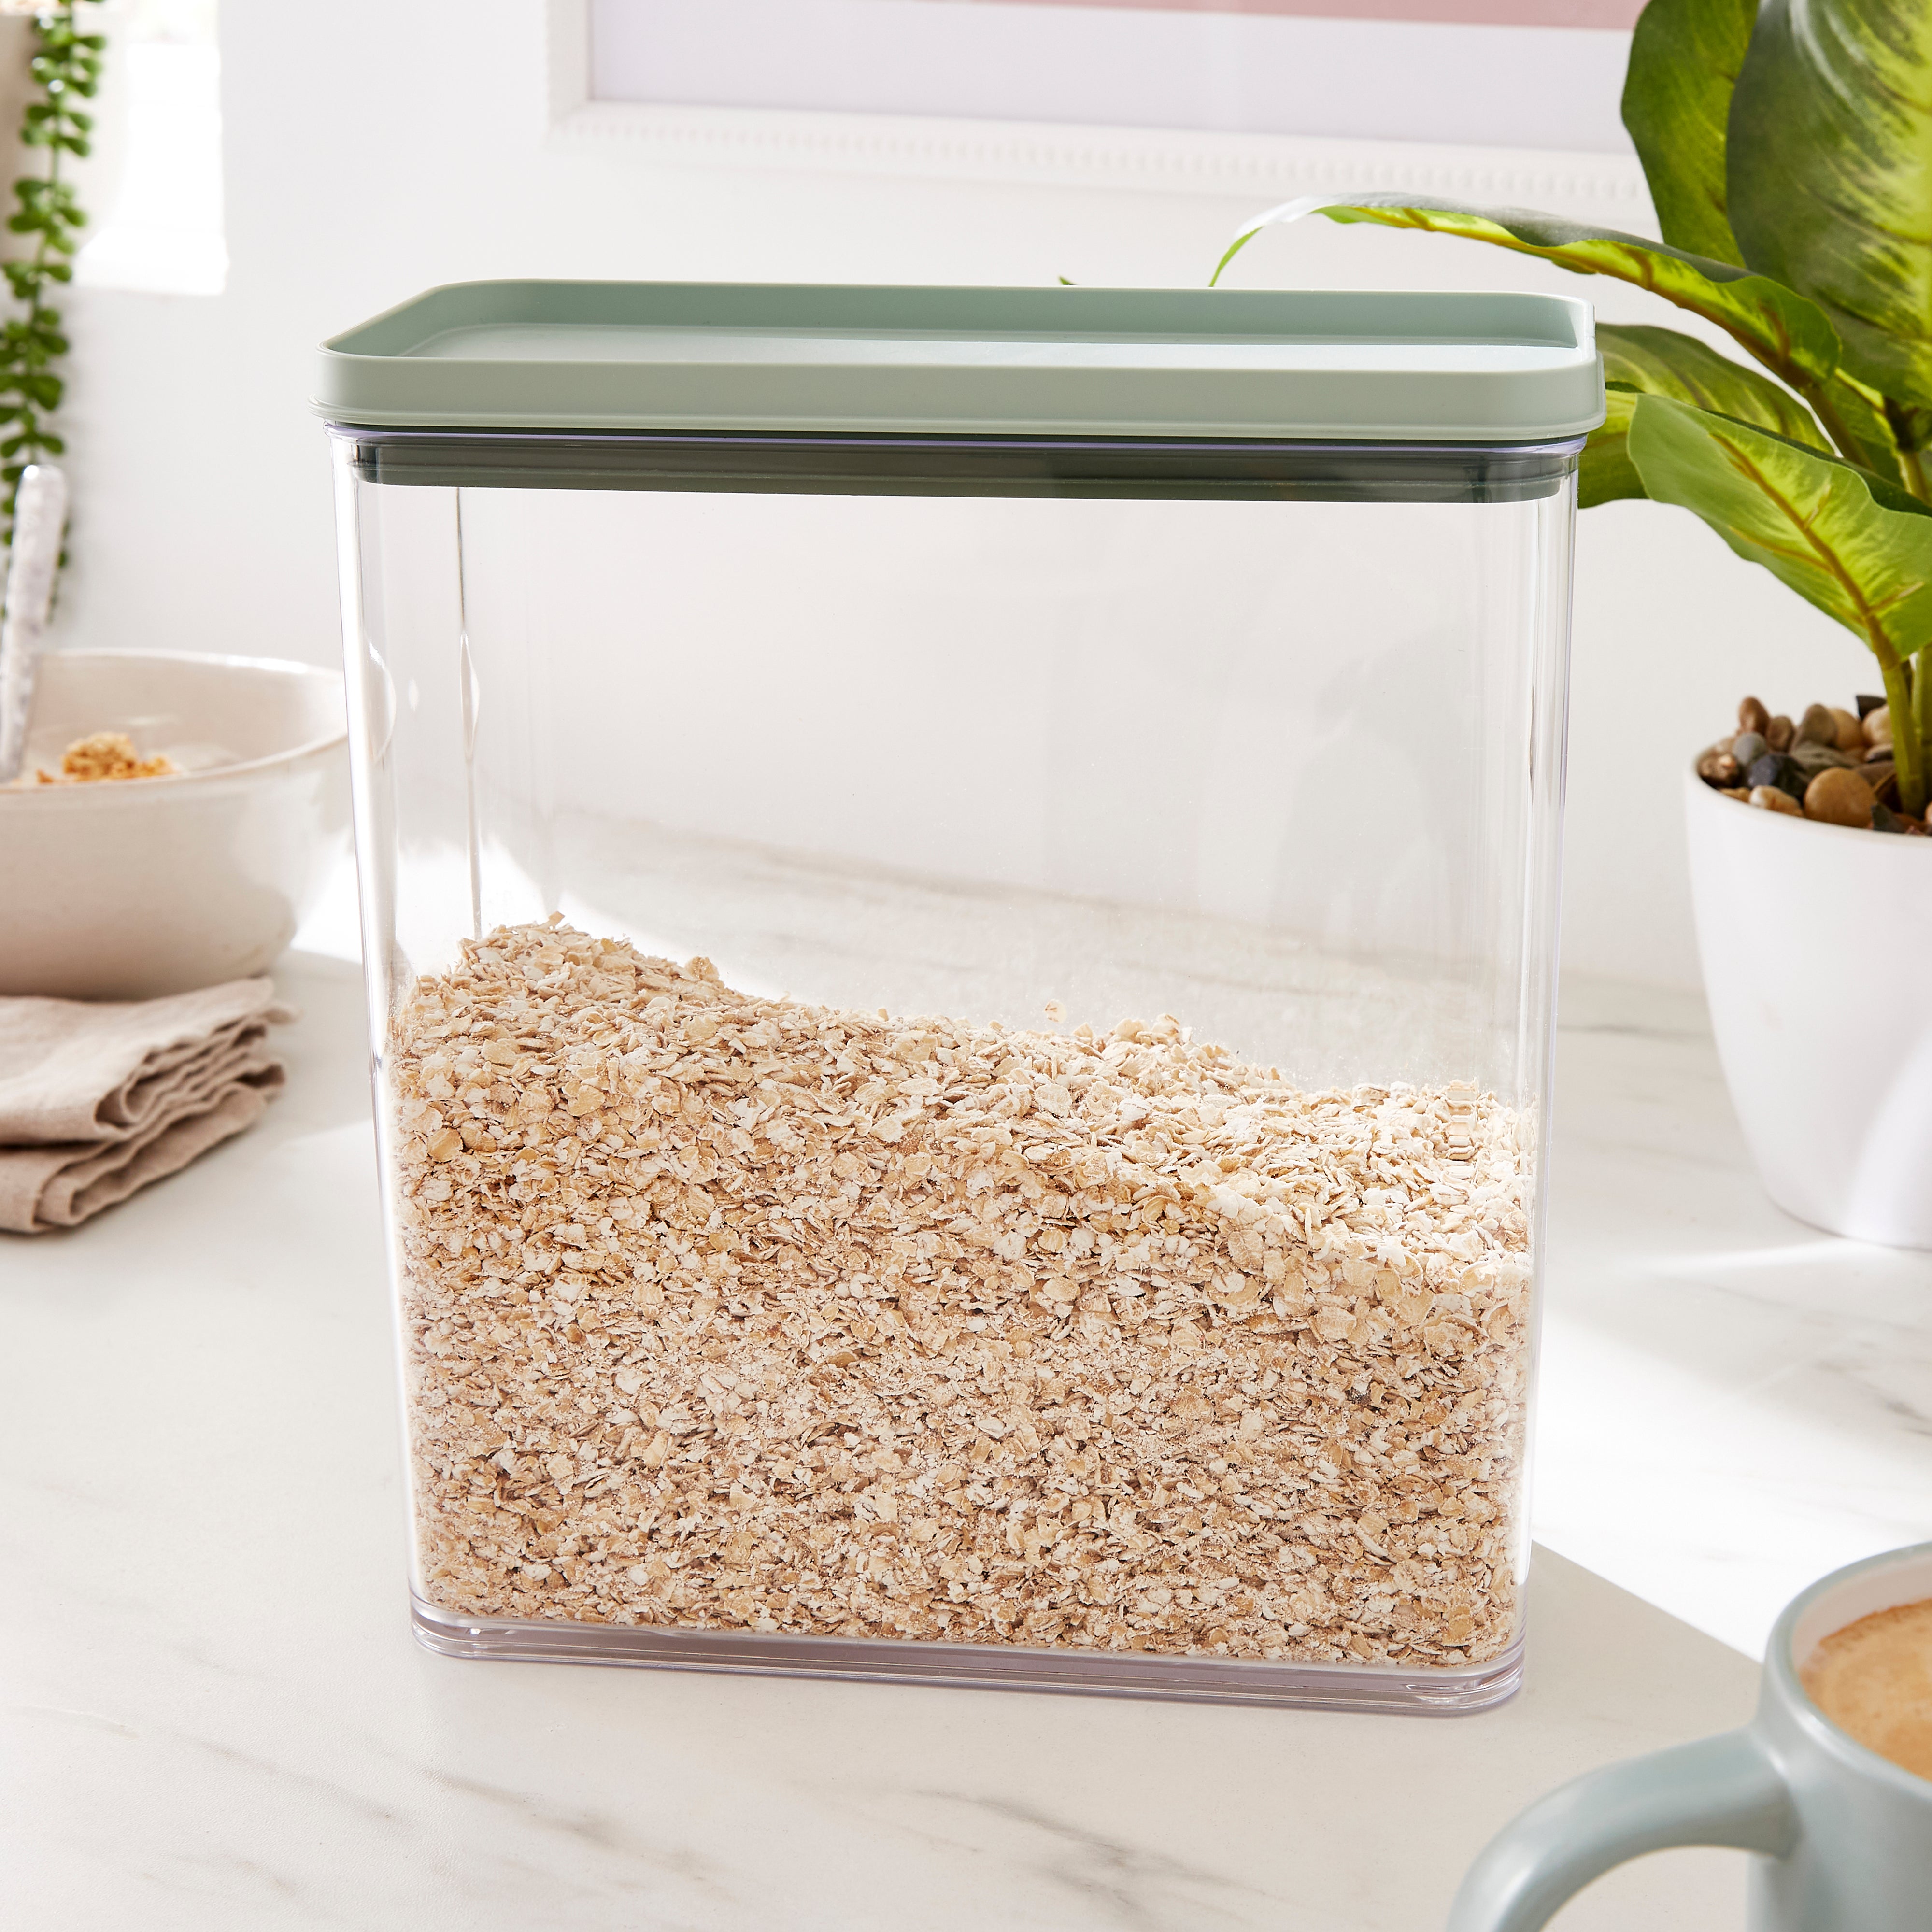 5five 0.5L Food Storage Container & Reviews